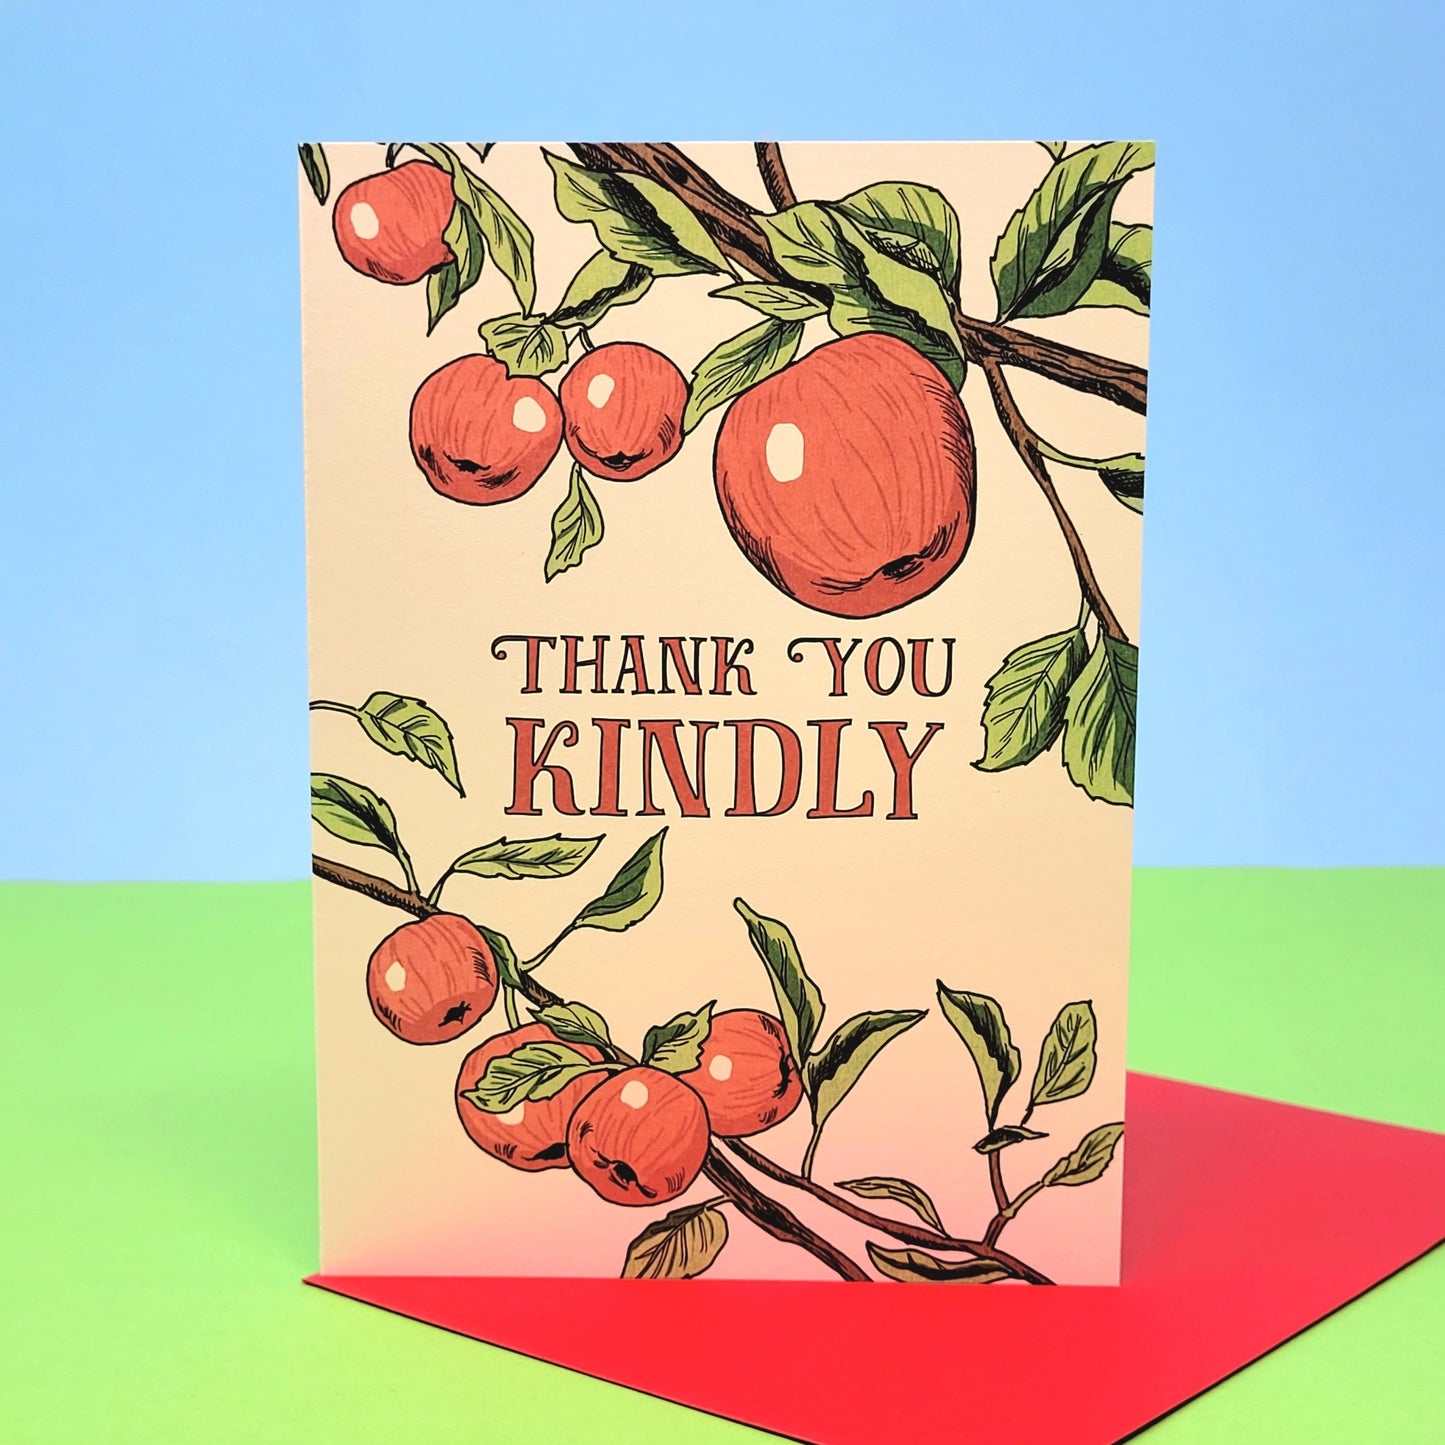 Thank You Kindly Apples Greeting Card